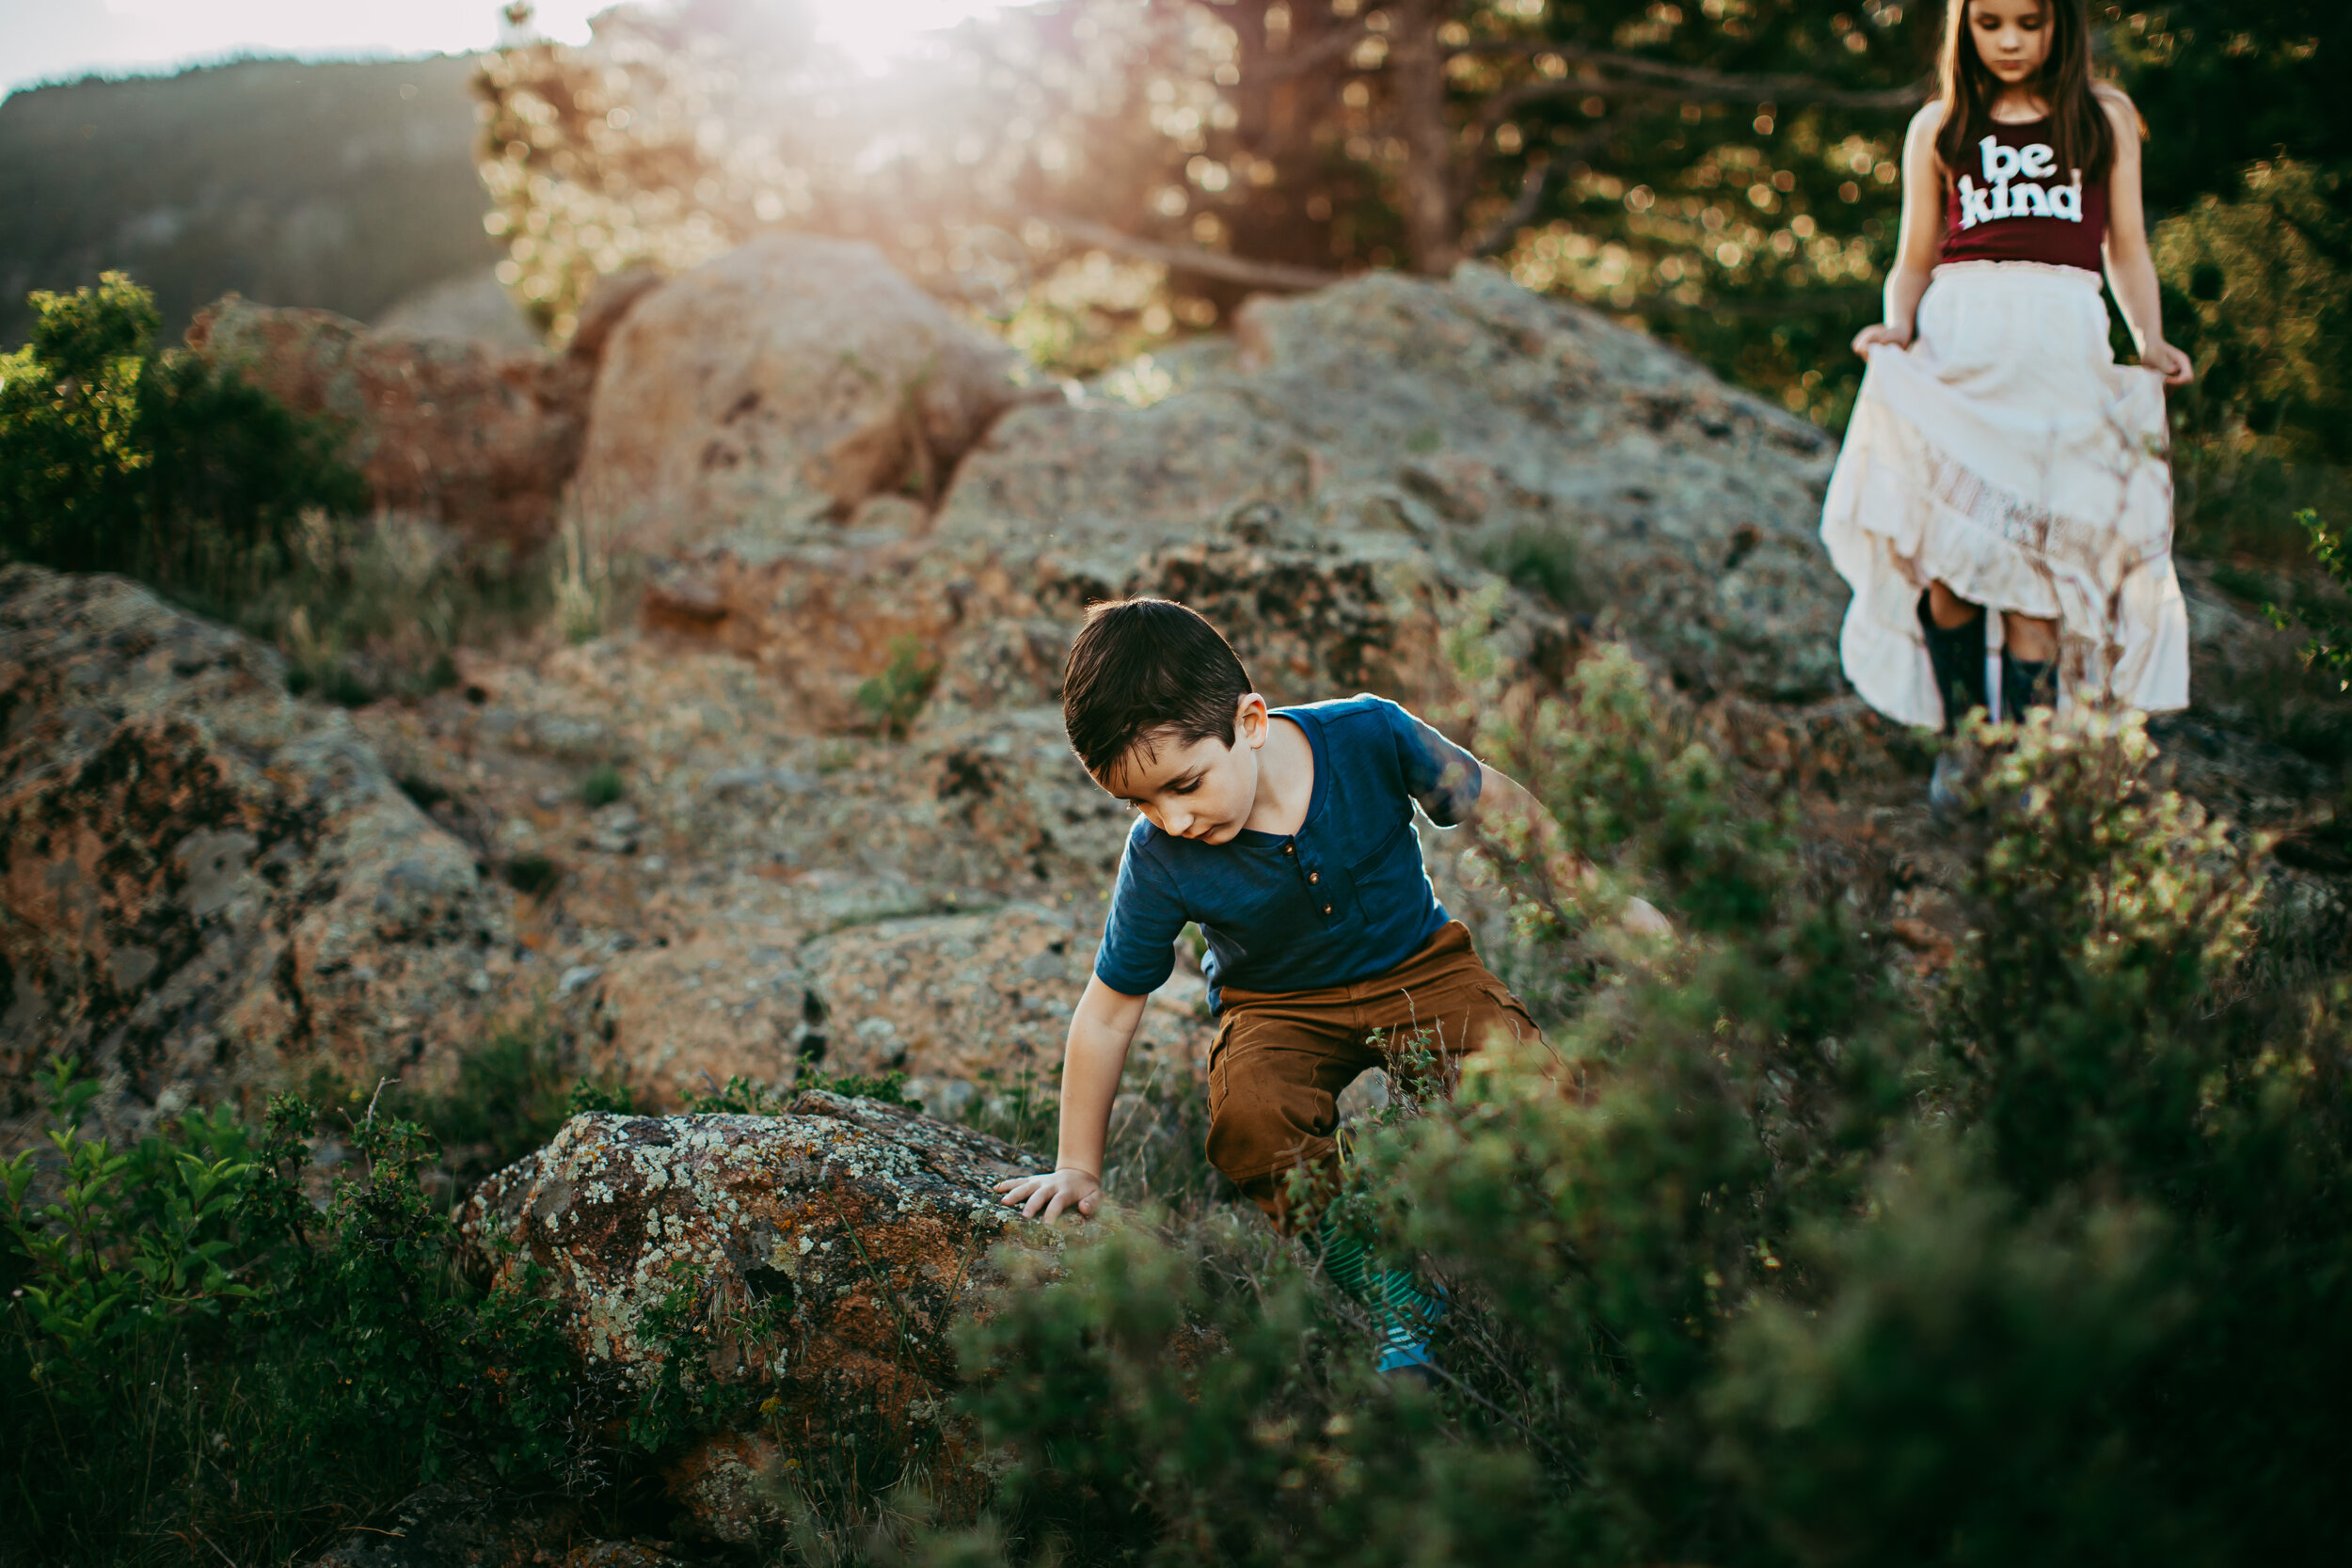  These kids are exploring the rocks and what hides between them #tealawardphotography #texasfamilyphotographer #amarillophotographer #amarillofamilyphotographer #lifestylephotography #fallphotos #familyphotoshoot #family #lovingsiblings #photographytips #familyphotos #naturalfamilyinteraction 